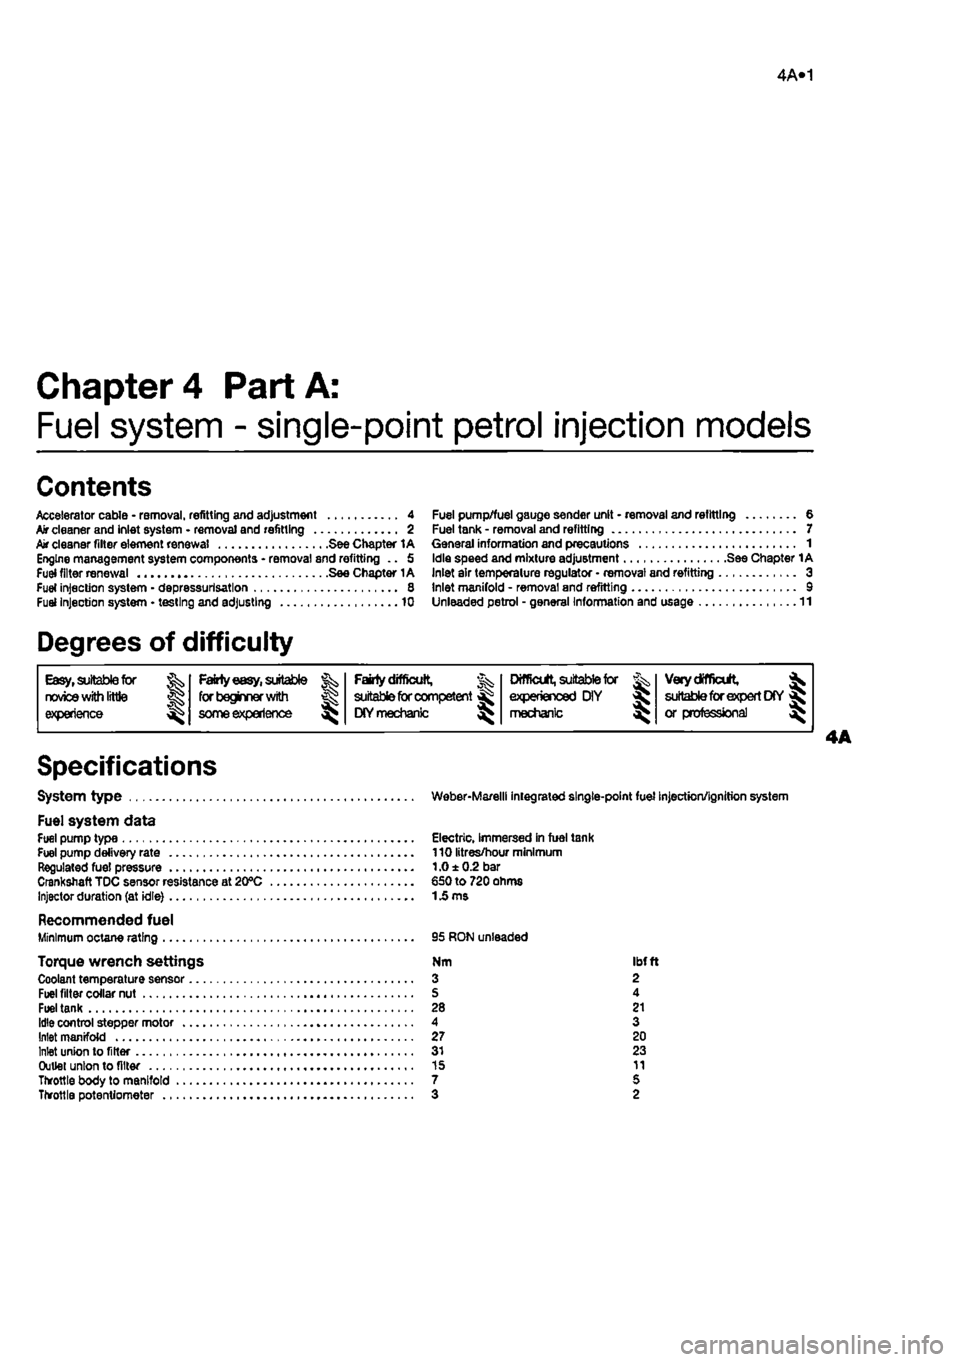 FIAT PUNTO 1995 176 / 1.G Workshop Manual 
4A«1 
Chapter 4 Part A: 
Fuel system - single-point petrol injection models 
Contents 
Accelerator cable • removal, refitting and adjustment 4 Air cleaner and inlet system - removal and refitting 